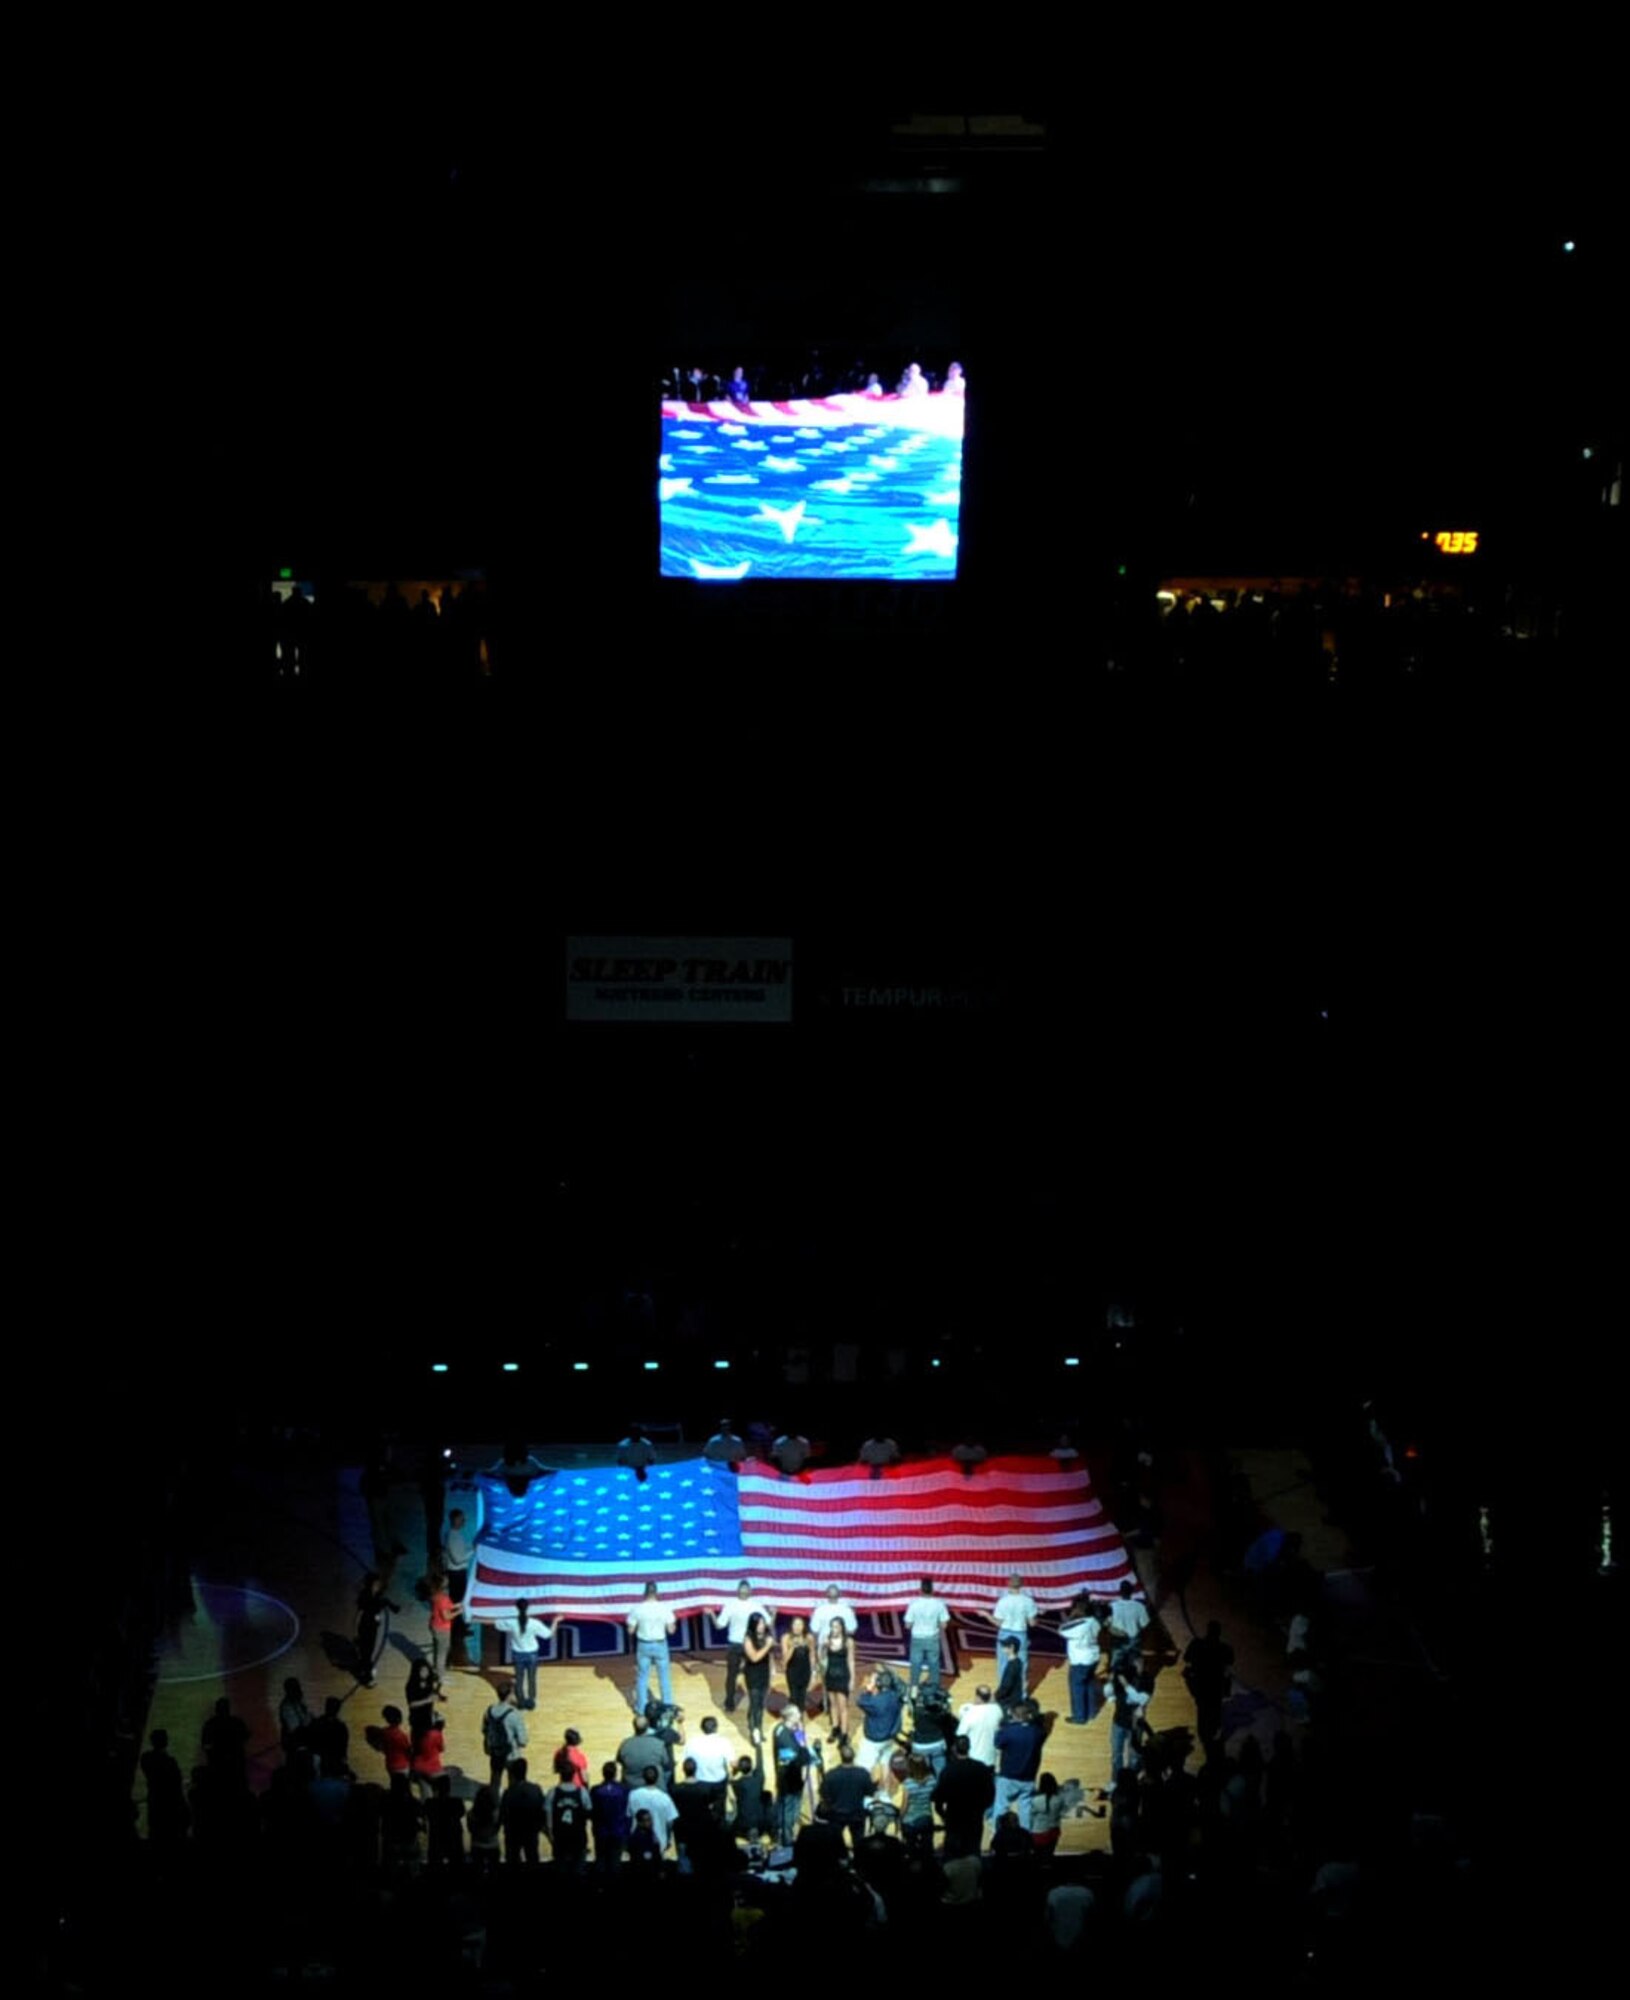 Beale Airmen present the colors during the National Anthem at the Sleep Train Arena for the Sacramento Kings vs. L.A. Clippers game April 17, 2013. Beale Airmen volunteered to help pass out prizes to fans during the contest. (U.S. Air Force photo by Airman 1st Class Bobby Cummings/Released)